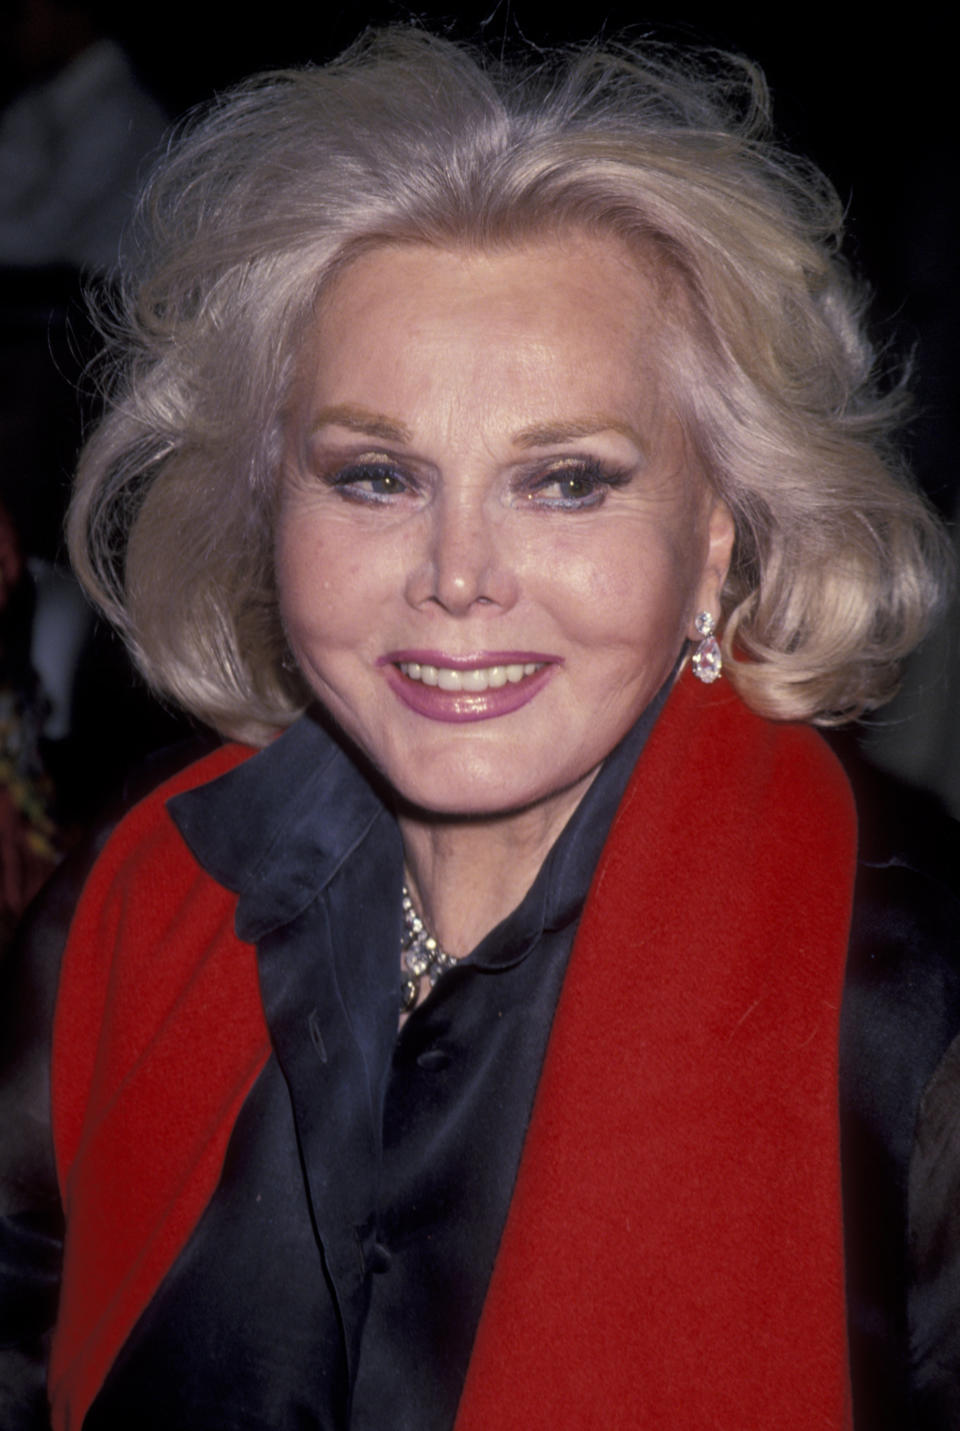 Gabor photographed in 1994.&nbsp;Gabor said this to the Observer in 1957, according to <a href="https://www.theguardian.com/film/2016/dec/19/zsa-zsa-gabor-her-best-and-most-memorable-quotes" target="_blank">The Guardian</a>.